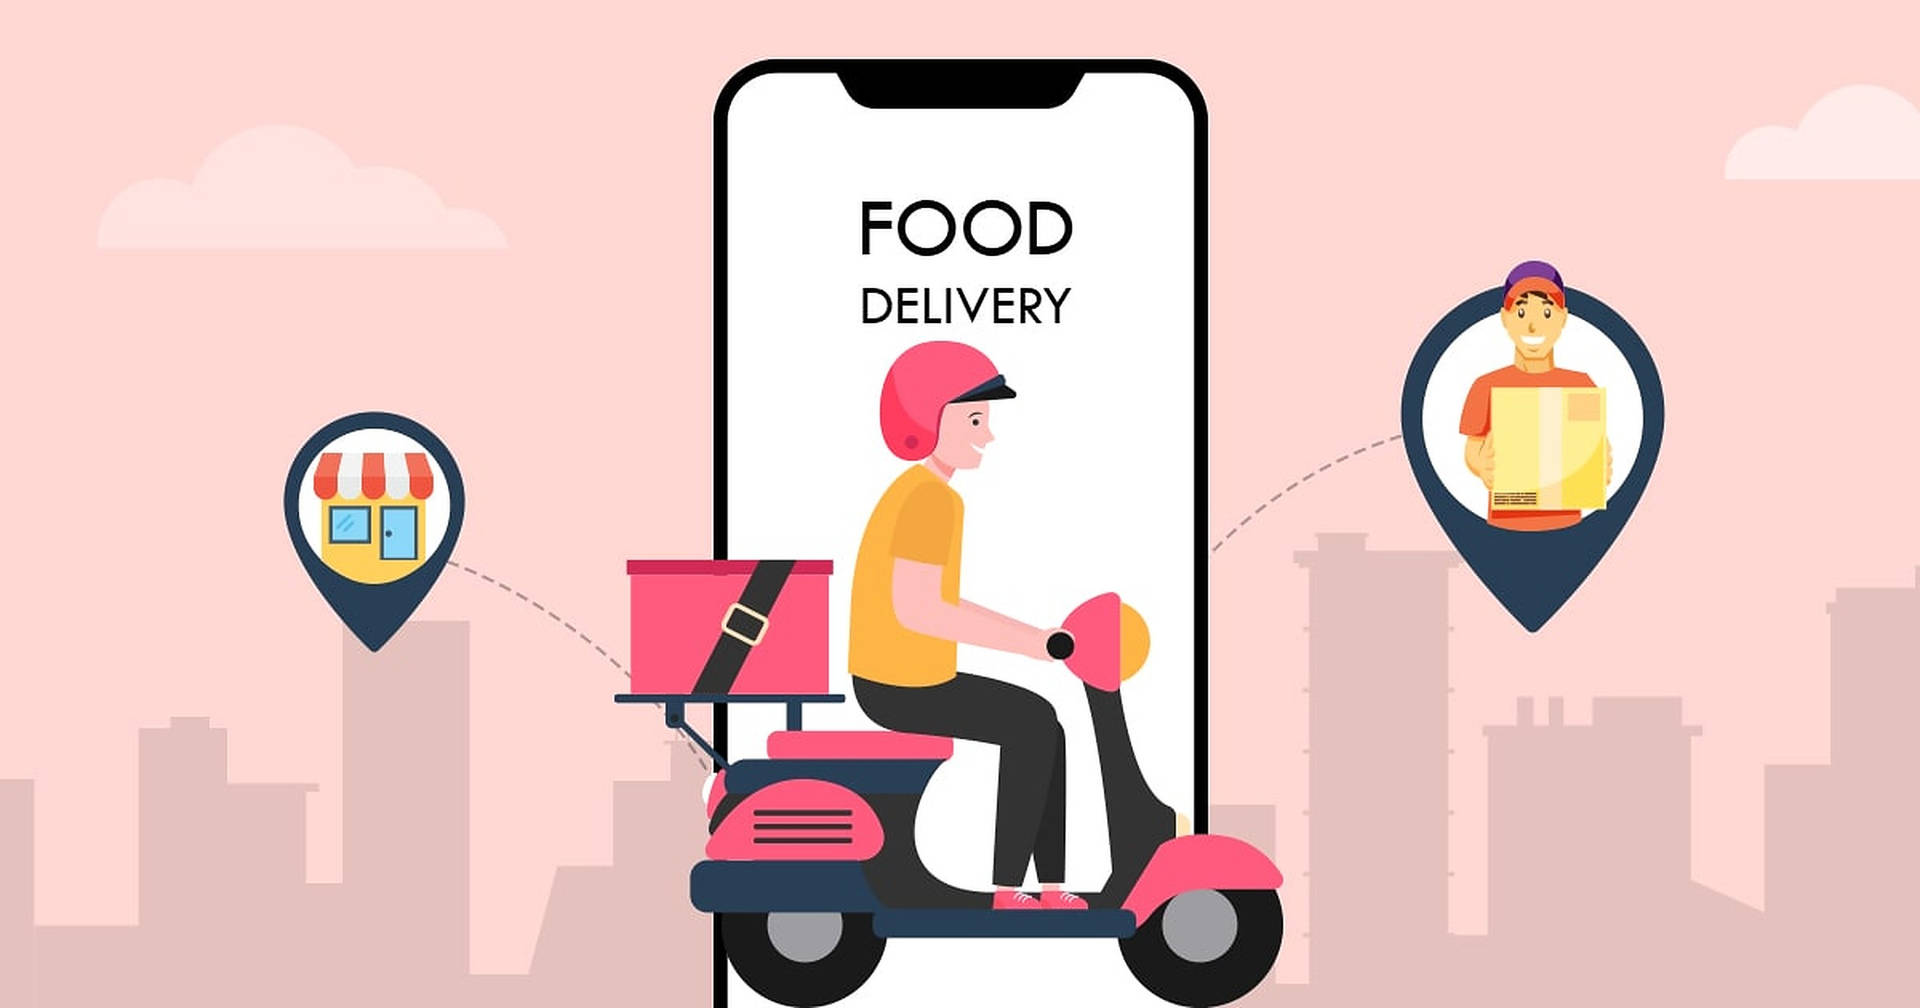 Food Delivery Background